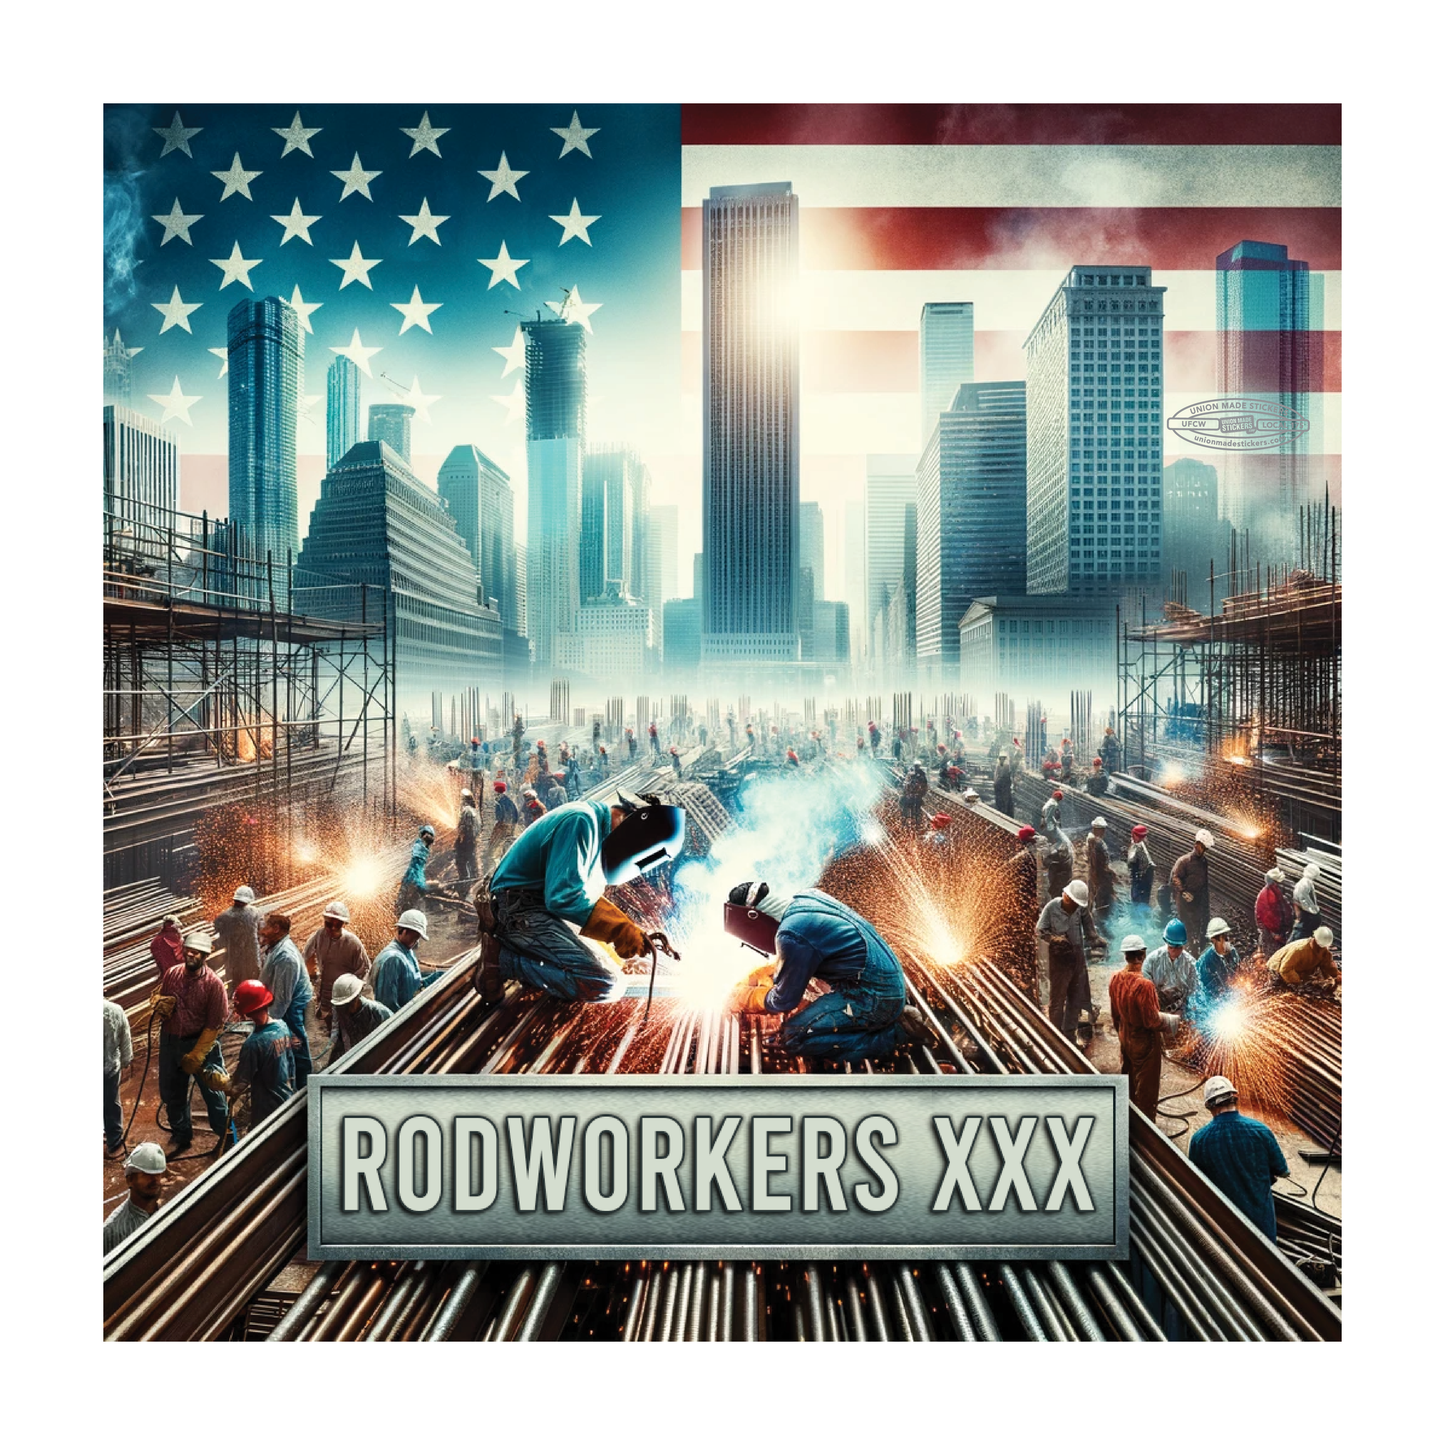 American Rodworkers